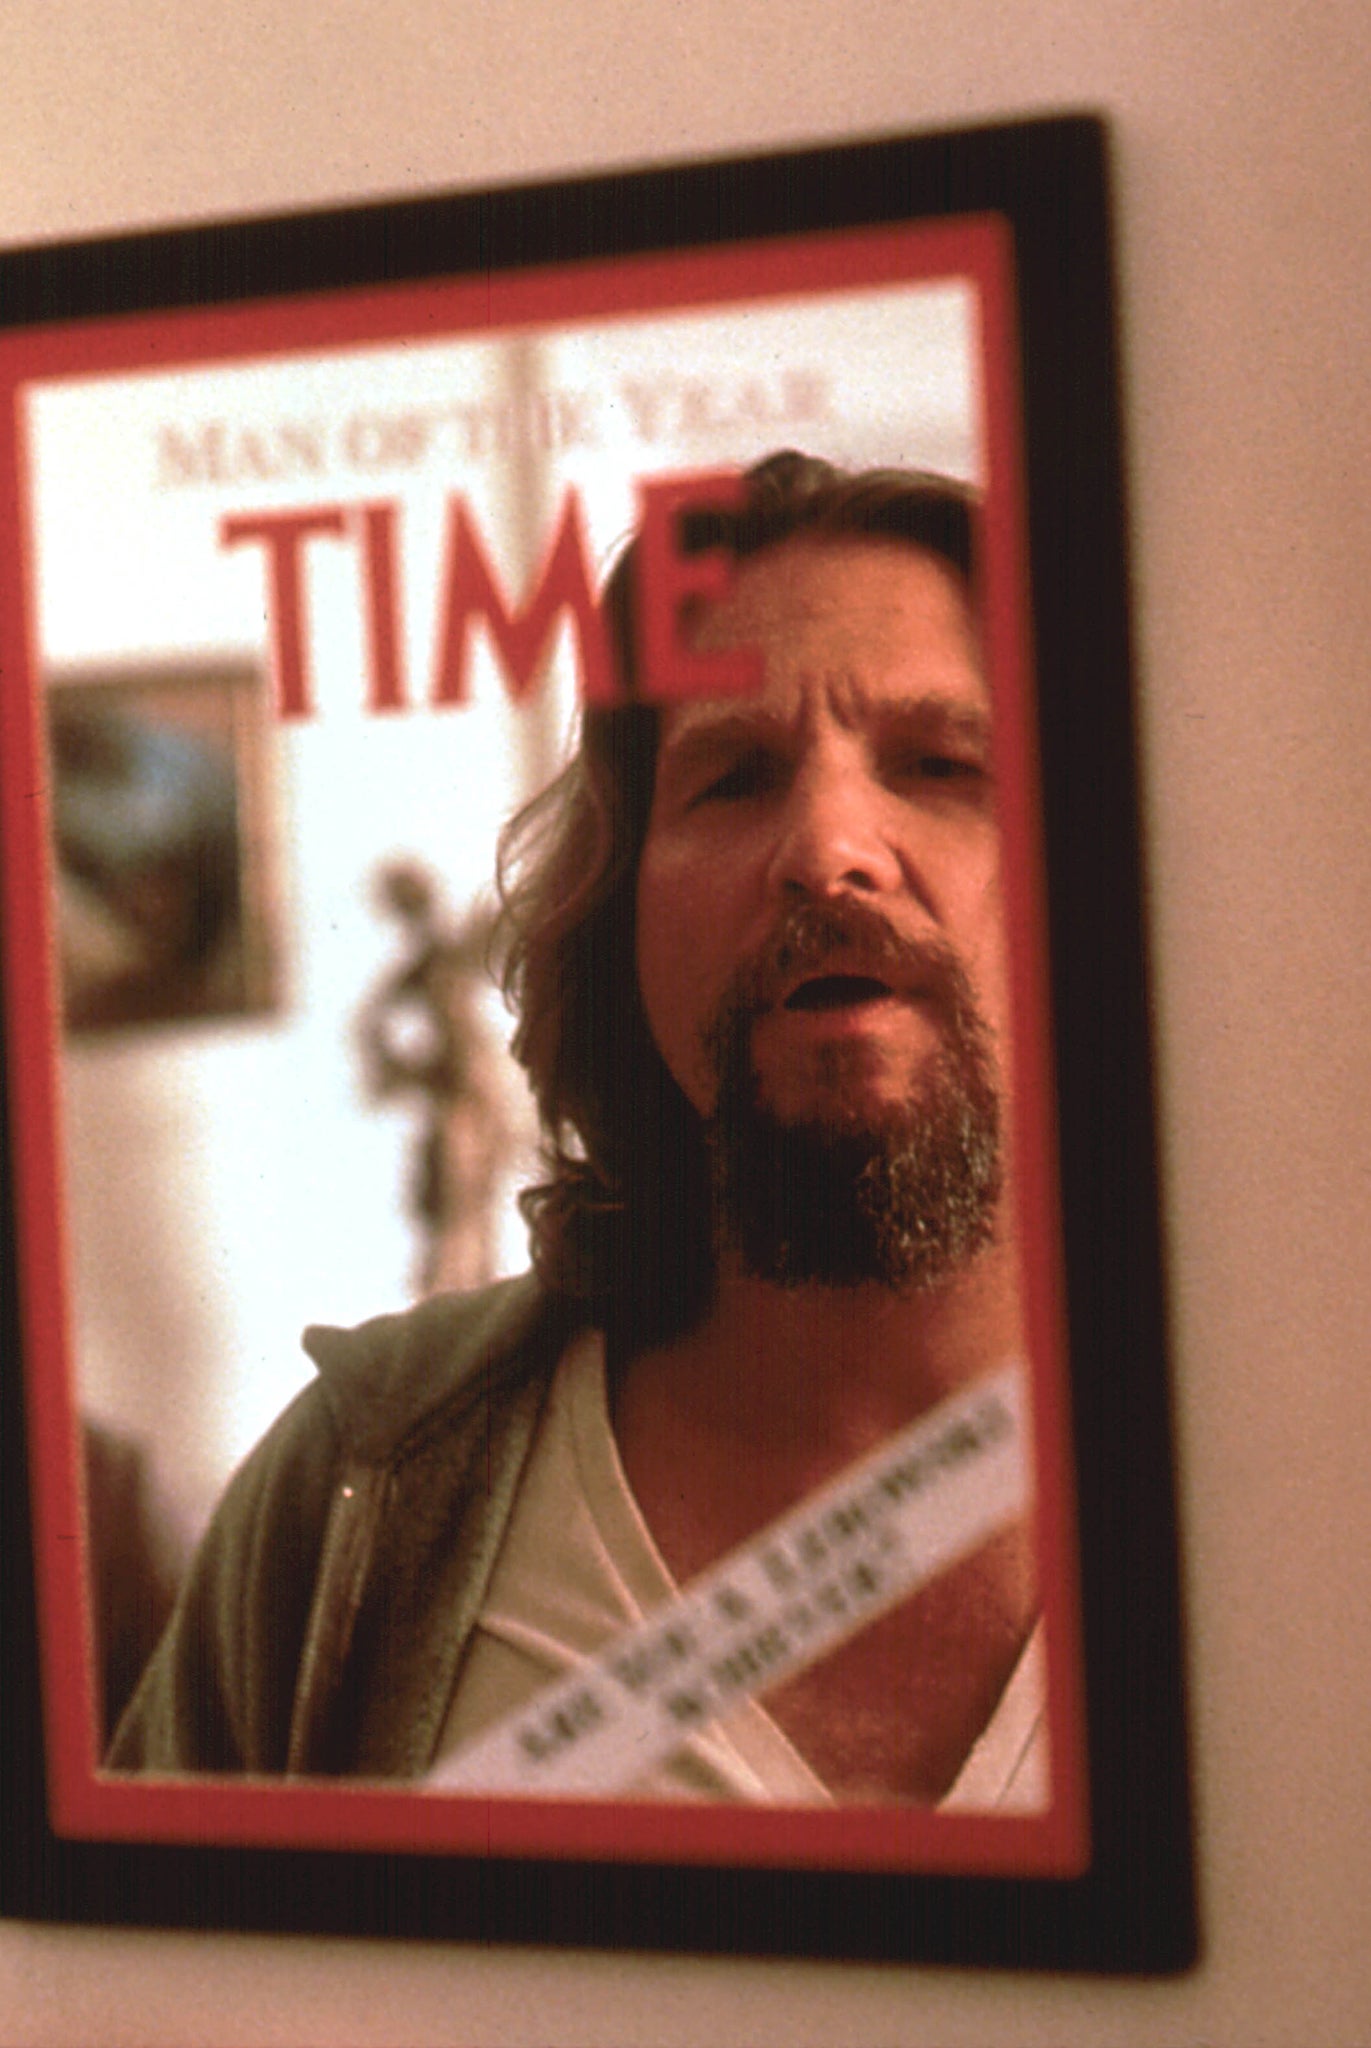 Bridges as the Dude in the 1998 cult classic 'The Big Lebowski'